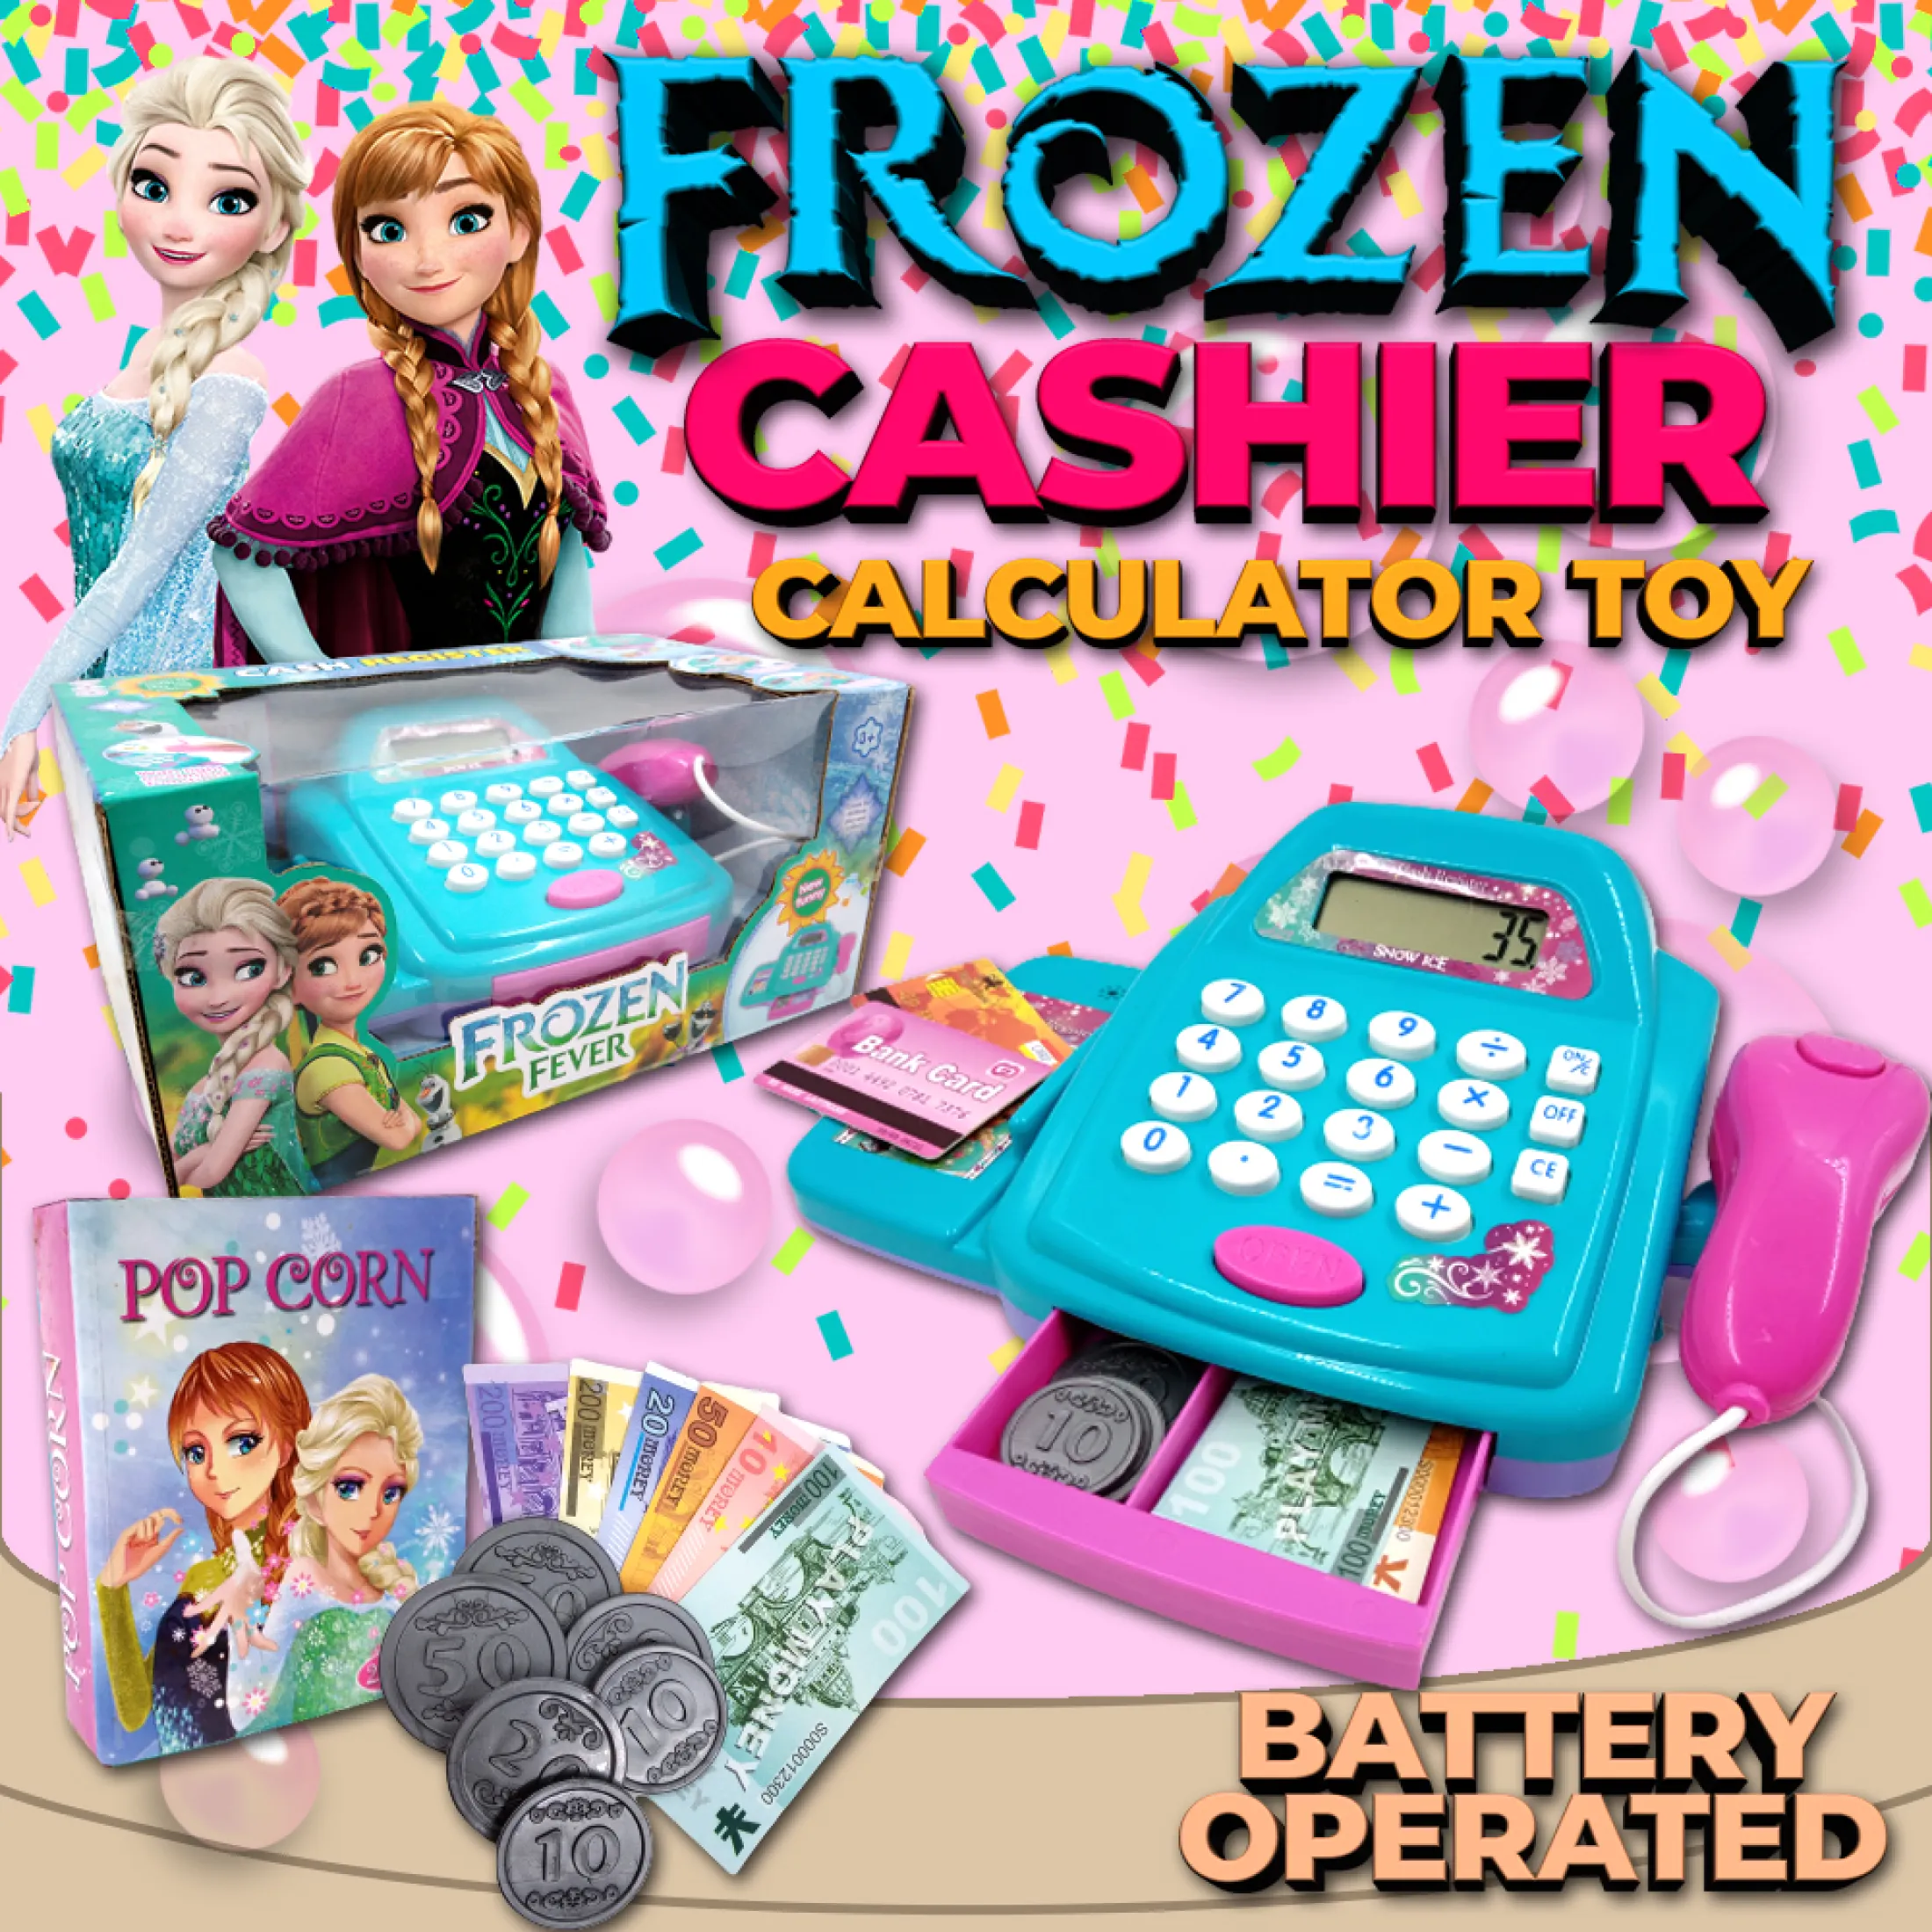 Frozen Cashier High Quality Calculator Toy Battery Operated With Lights And Sounds Toys For Kids Toys For Girls Lazada Ph